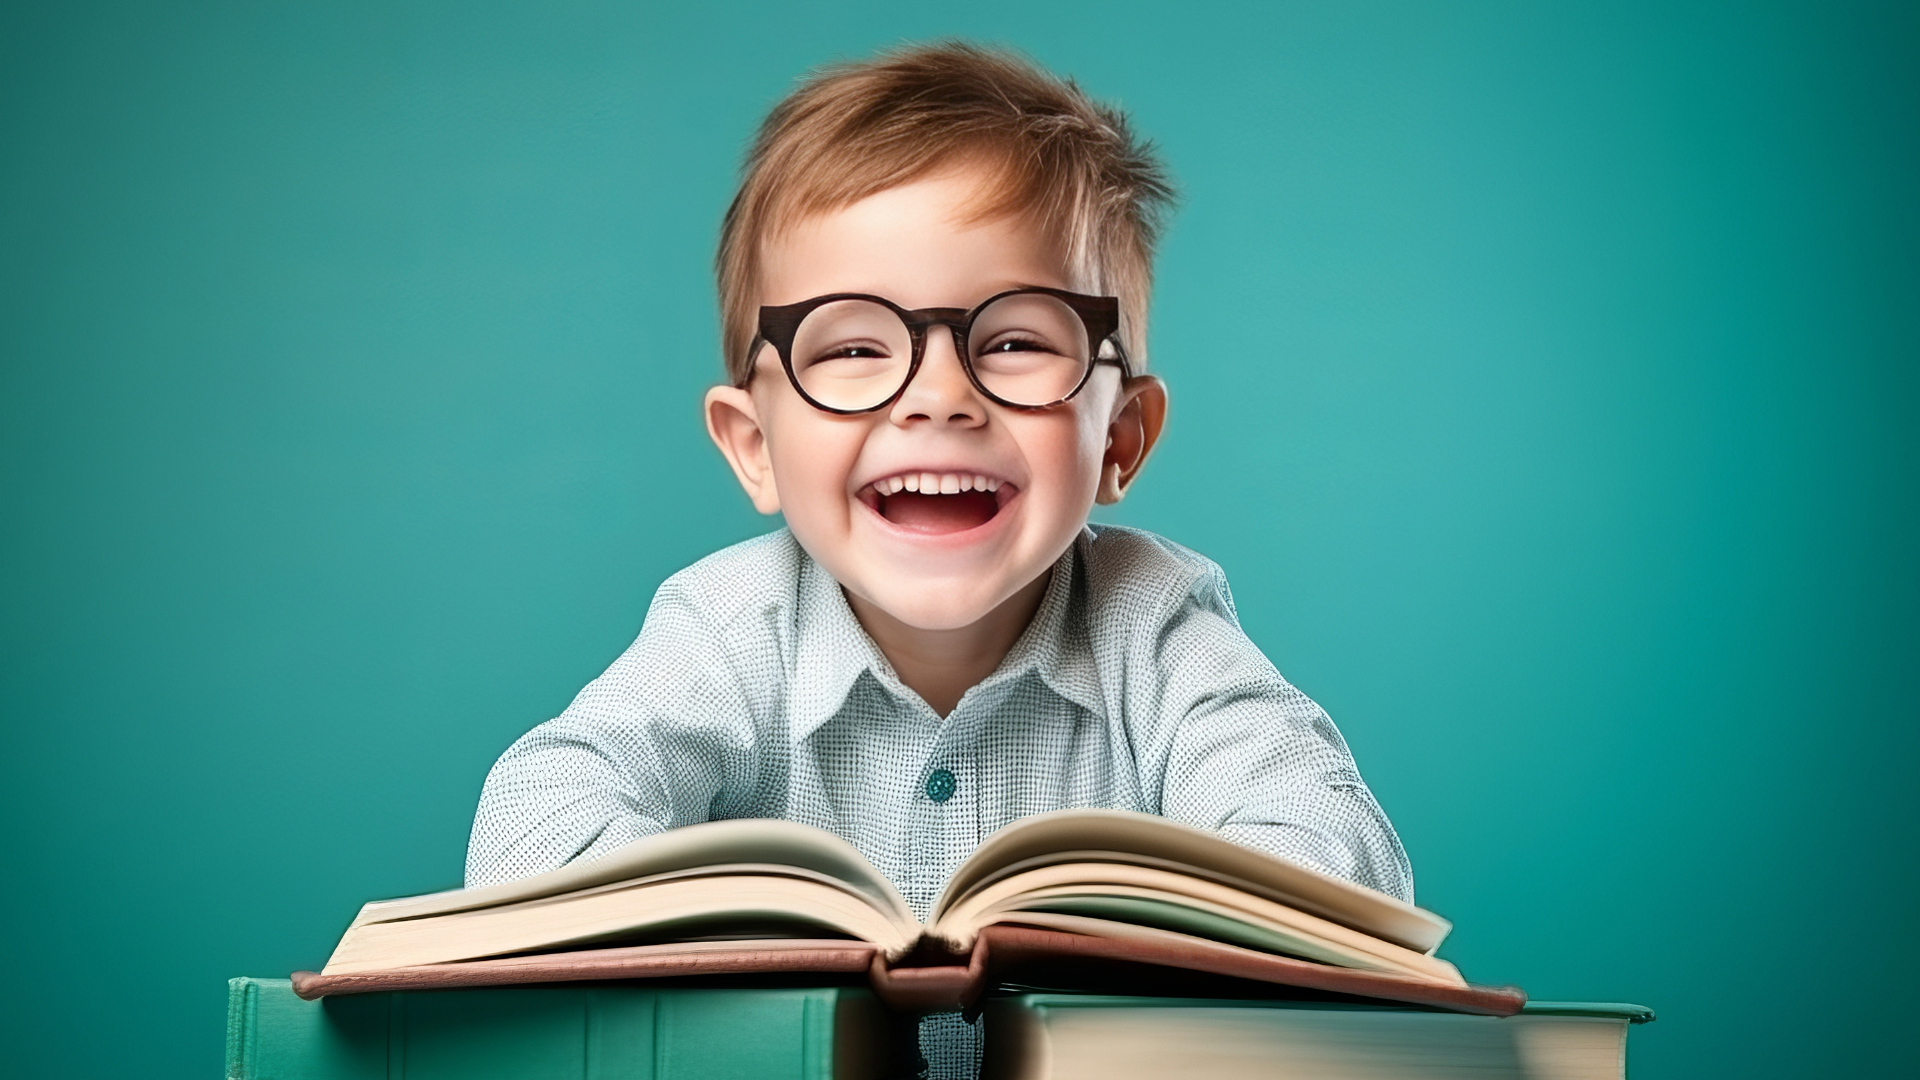 Boy with glasses and books